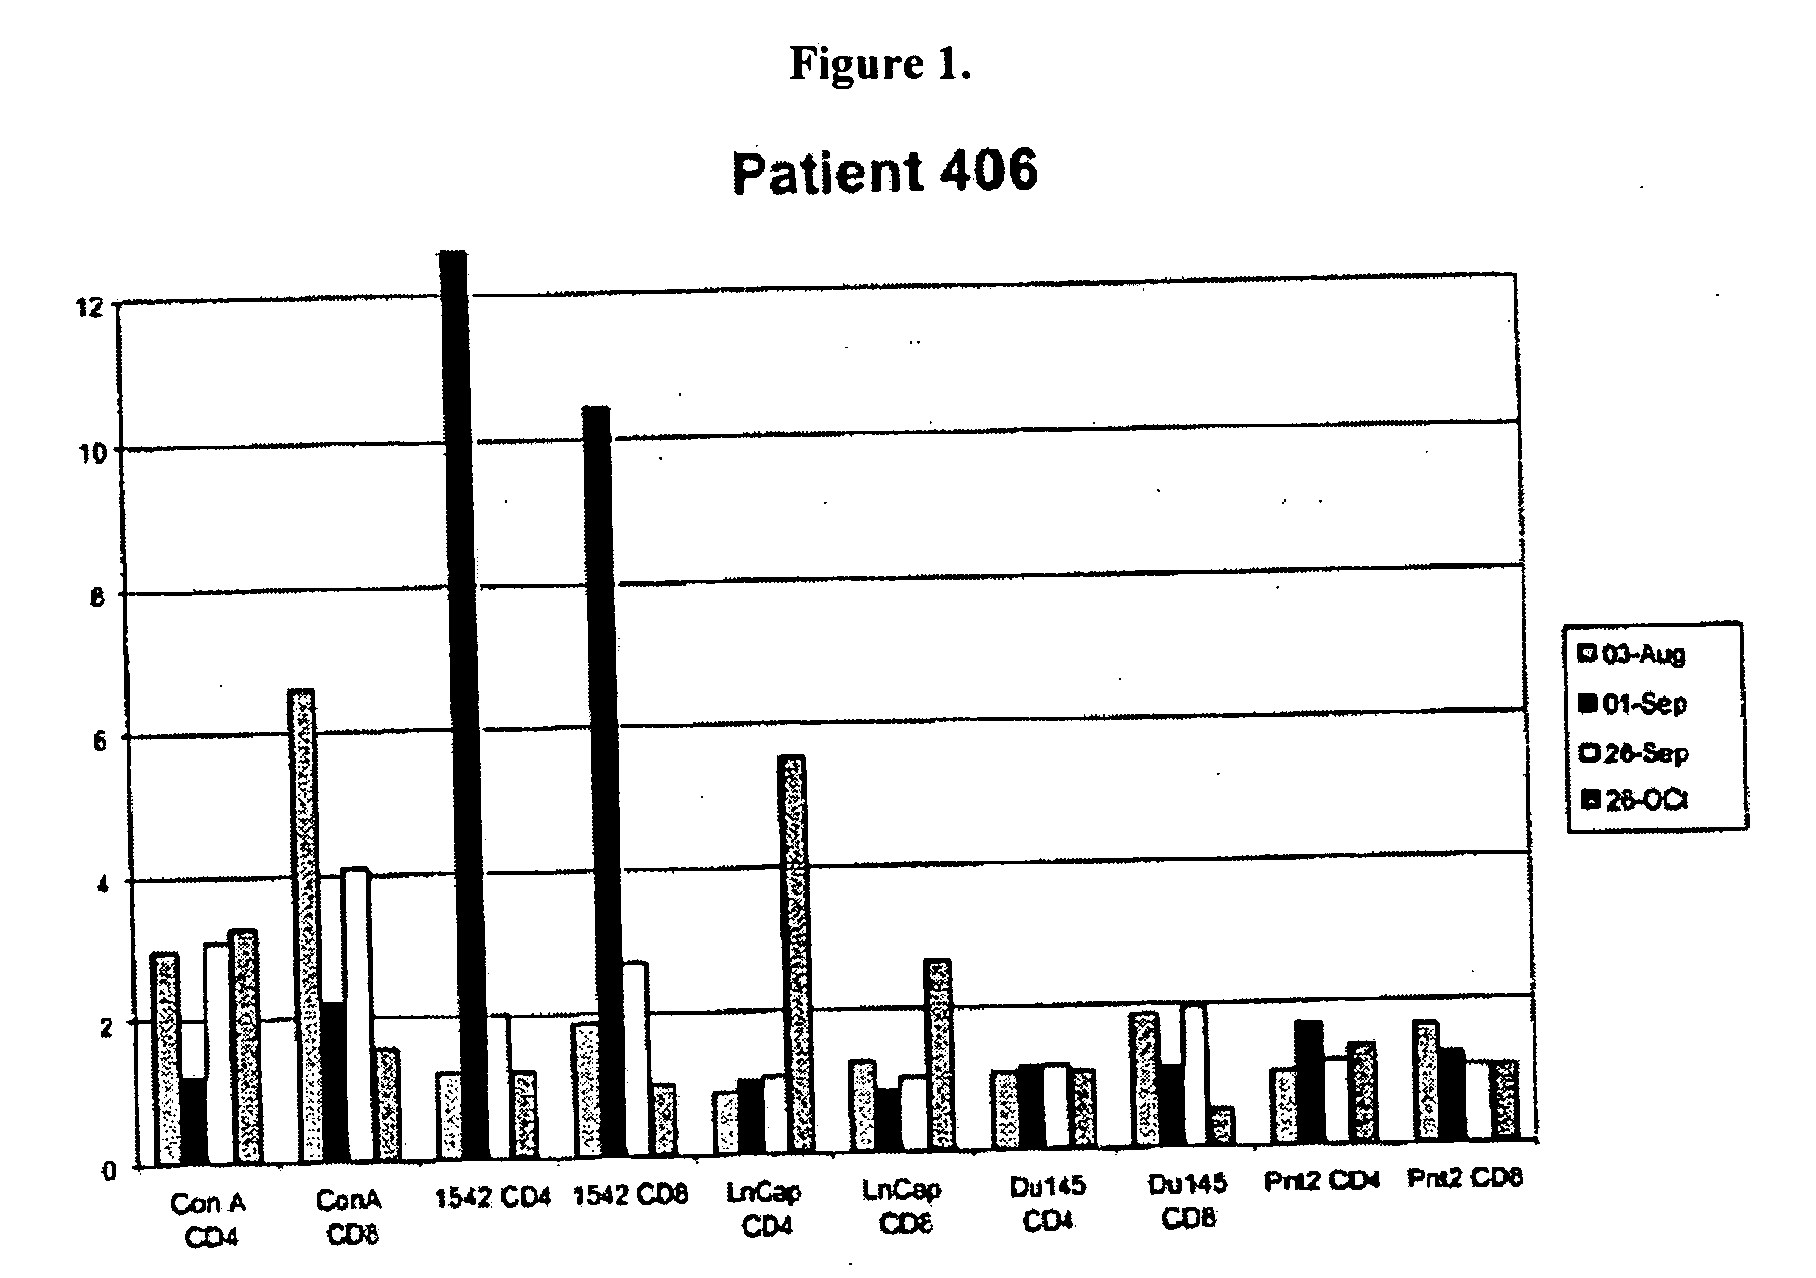 Human prostate cell lines in cancer treatment